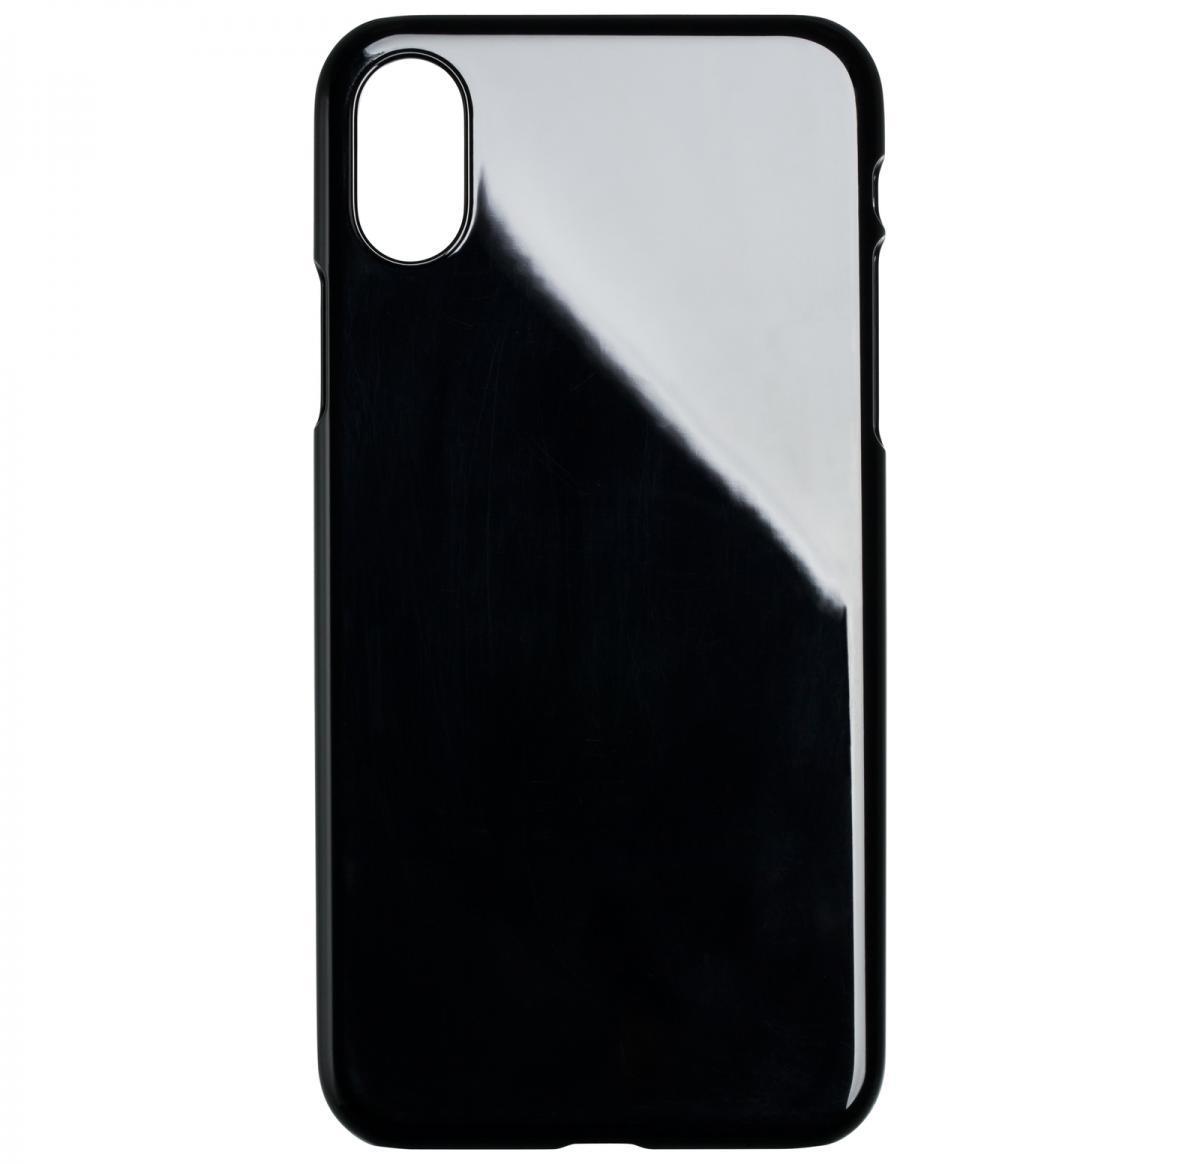 Smartphonecover -Cover iPhone X / XS BLACK